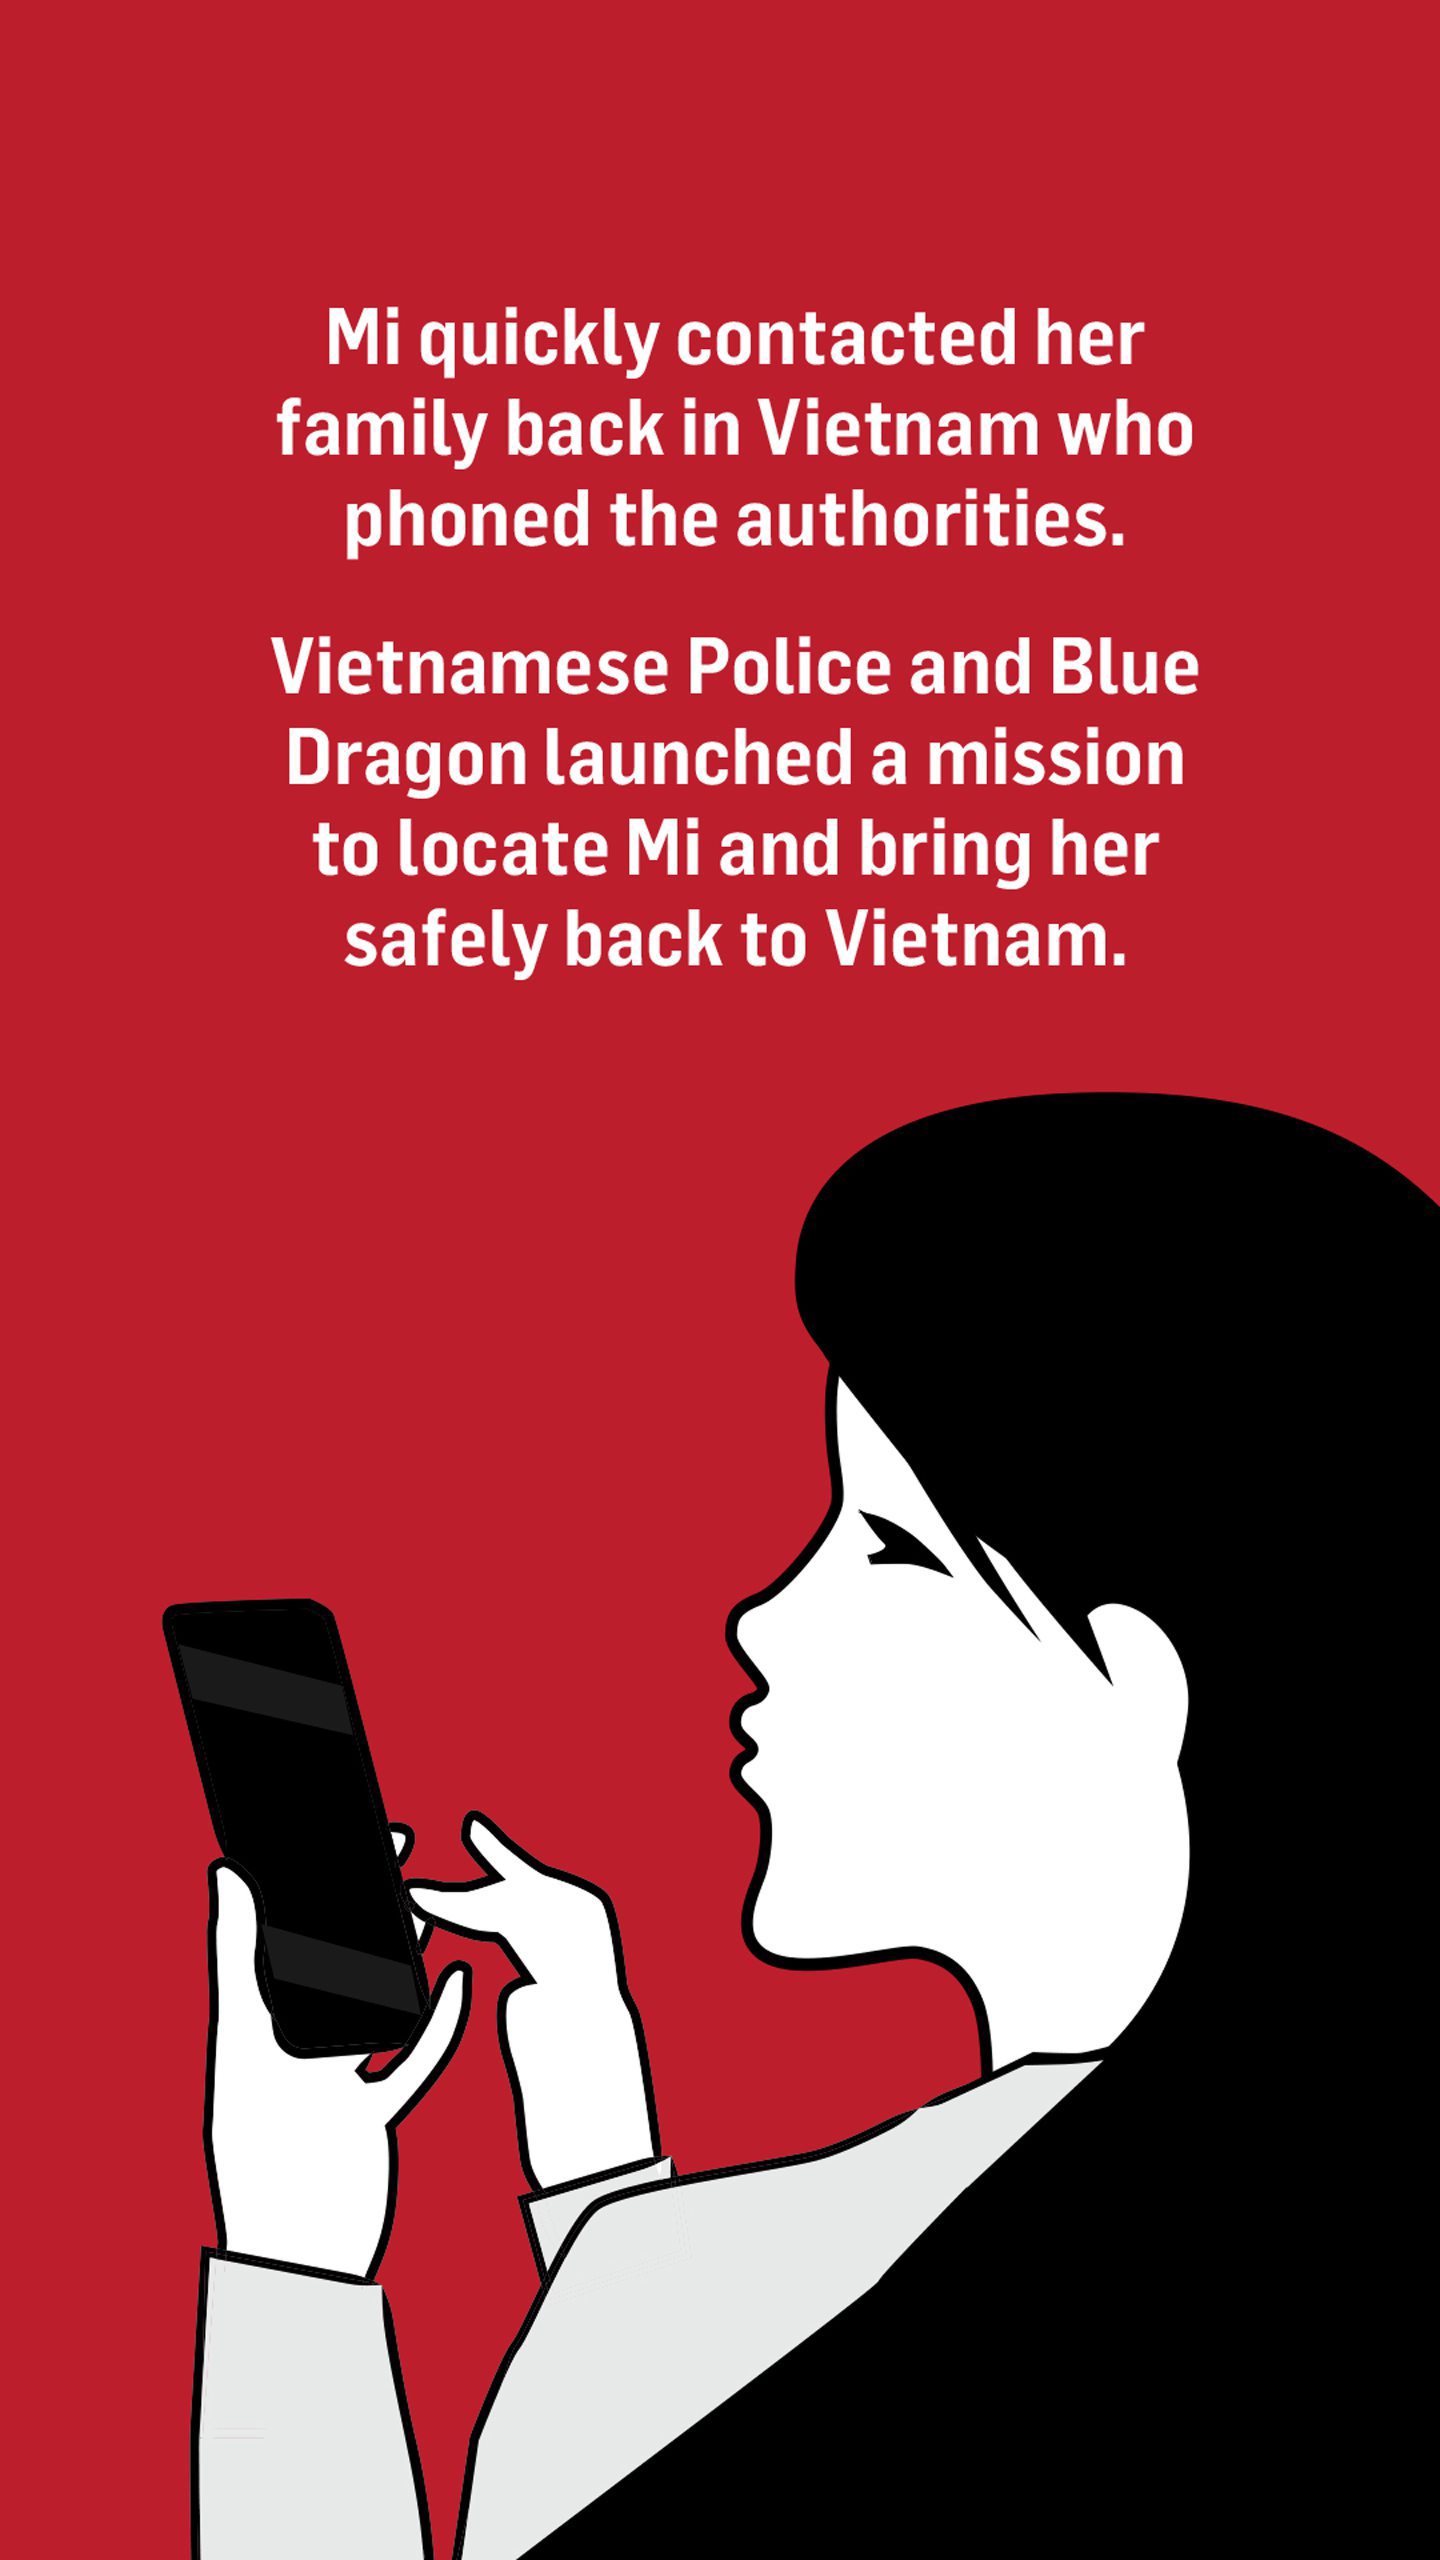 A woman holding a mobile phone and text above reads: Mi quickly contacted her family back in Vietnam who phoned the authorities.

Vietnamese Police and Blue Dragon launched a mission to locate her and bring her safely back to Vietnam.